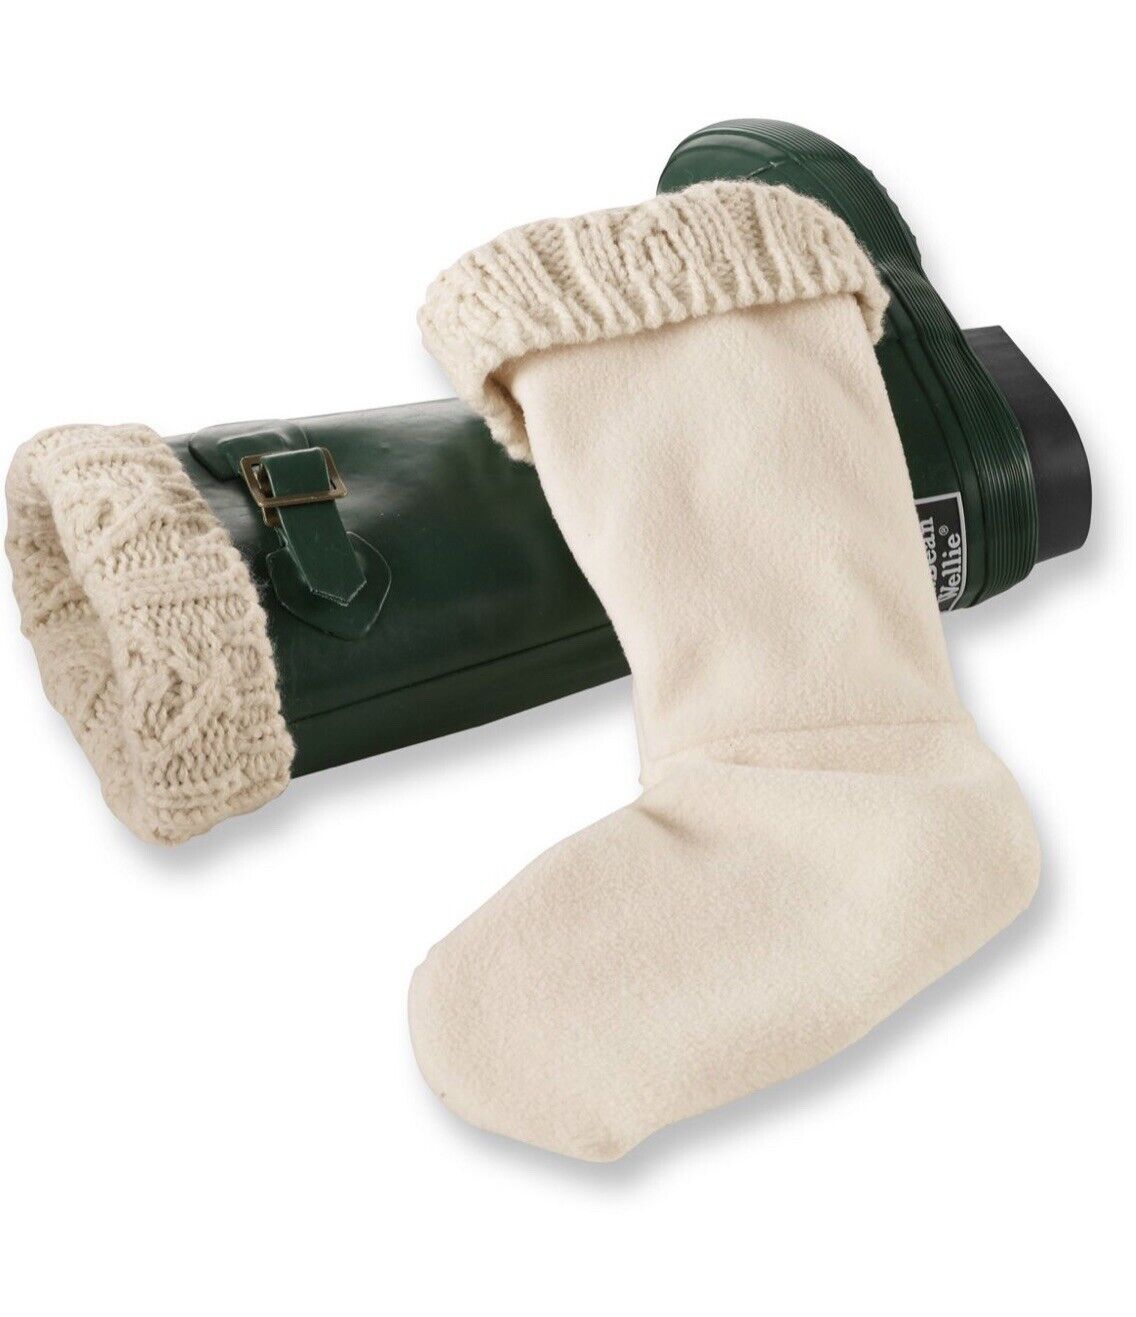 Ll Bean Kids Wellie Boot Warmers Natural Color M 1/2